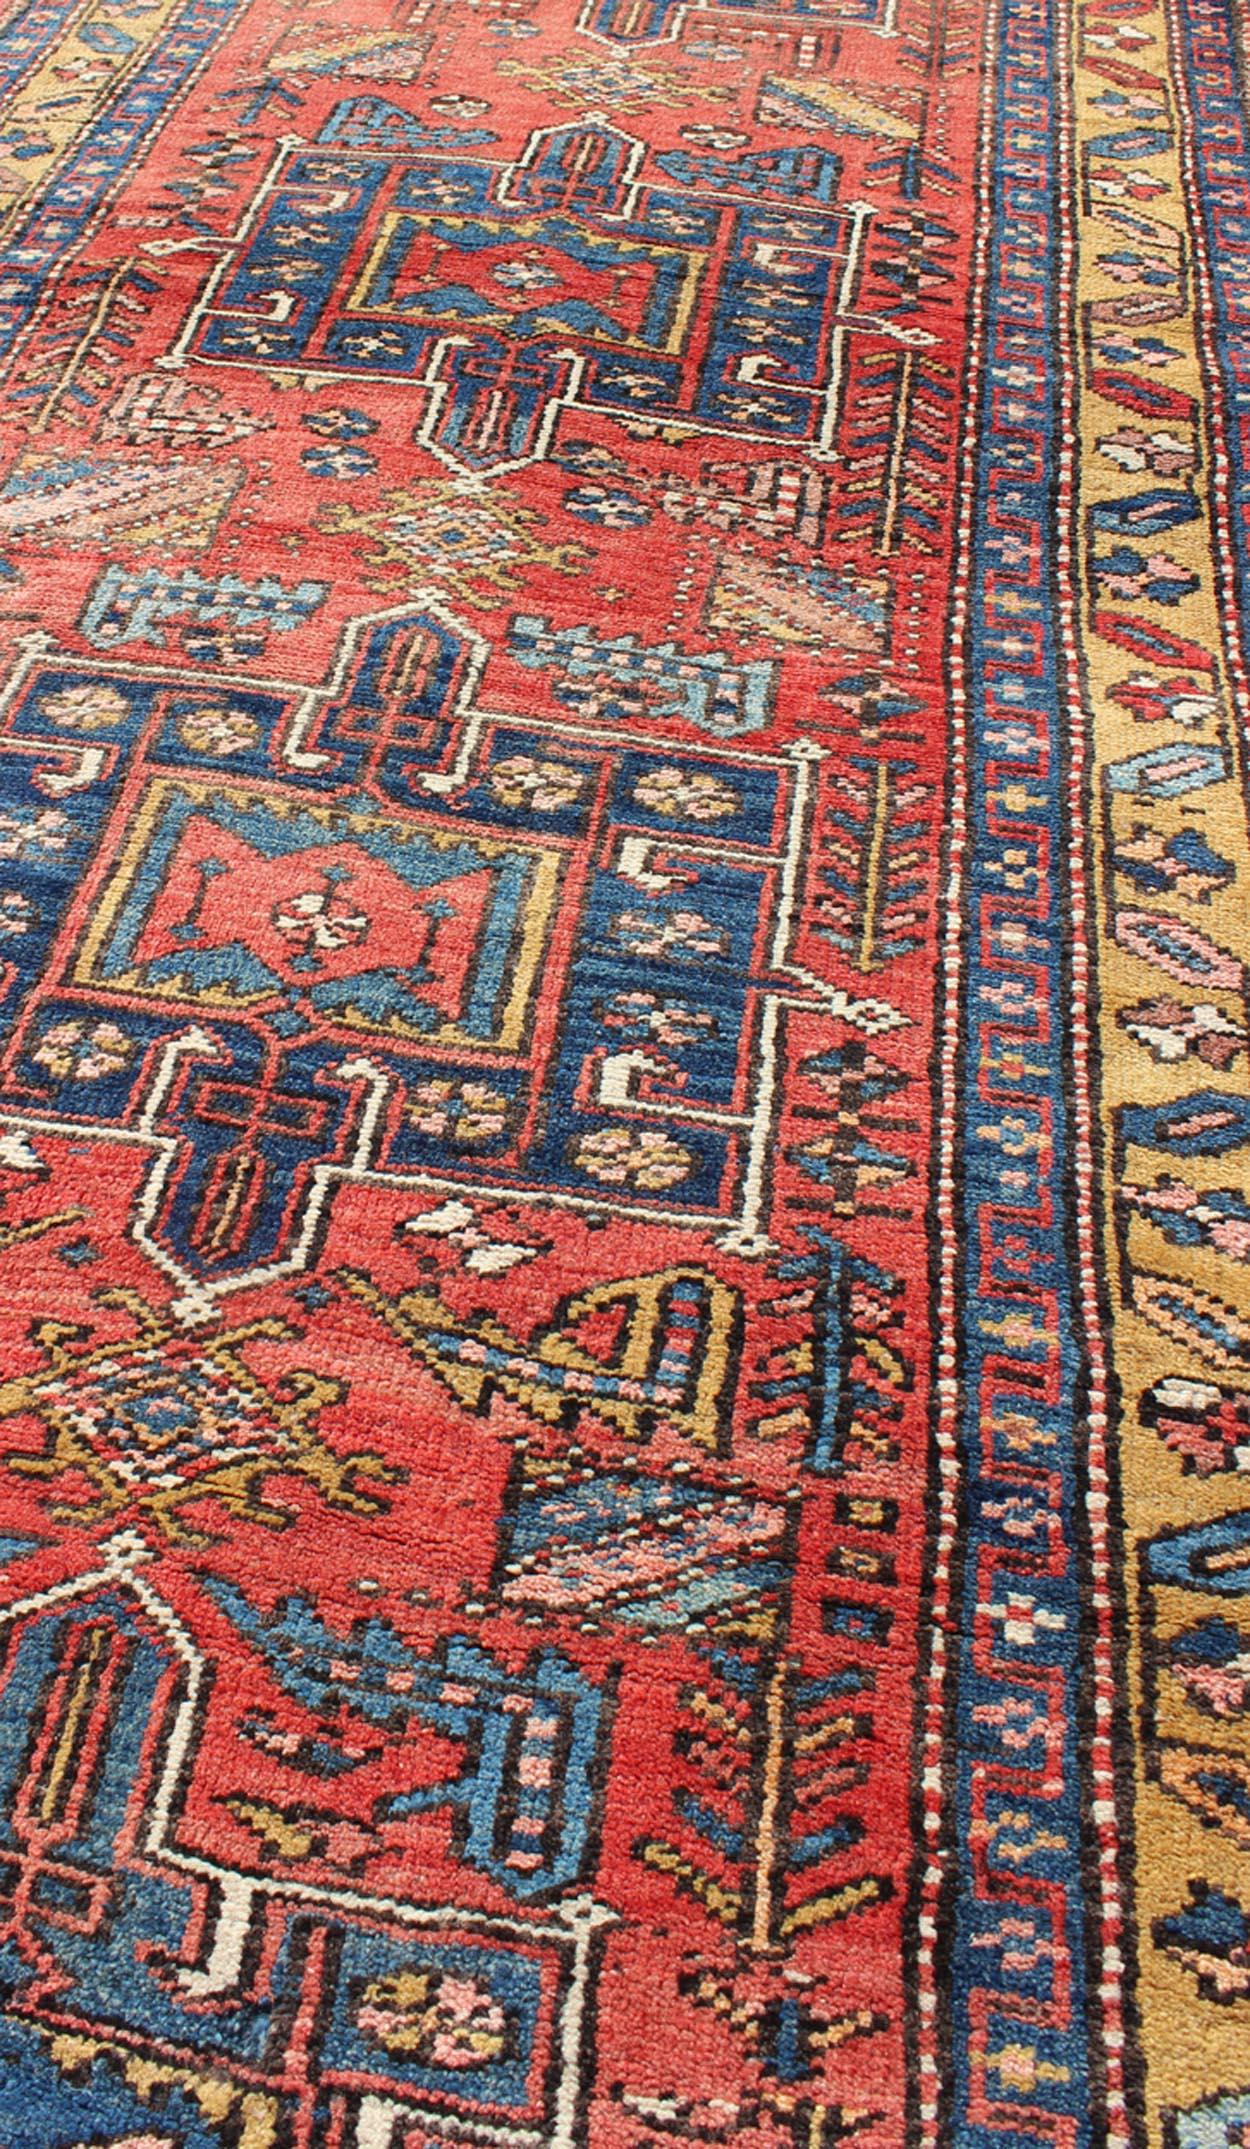 20th Century Persian Heriz Semi Antique Runner in Soft Red, Blue and Yellow Colors